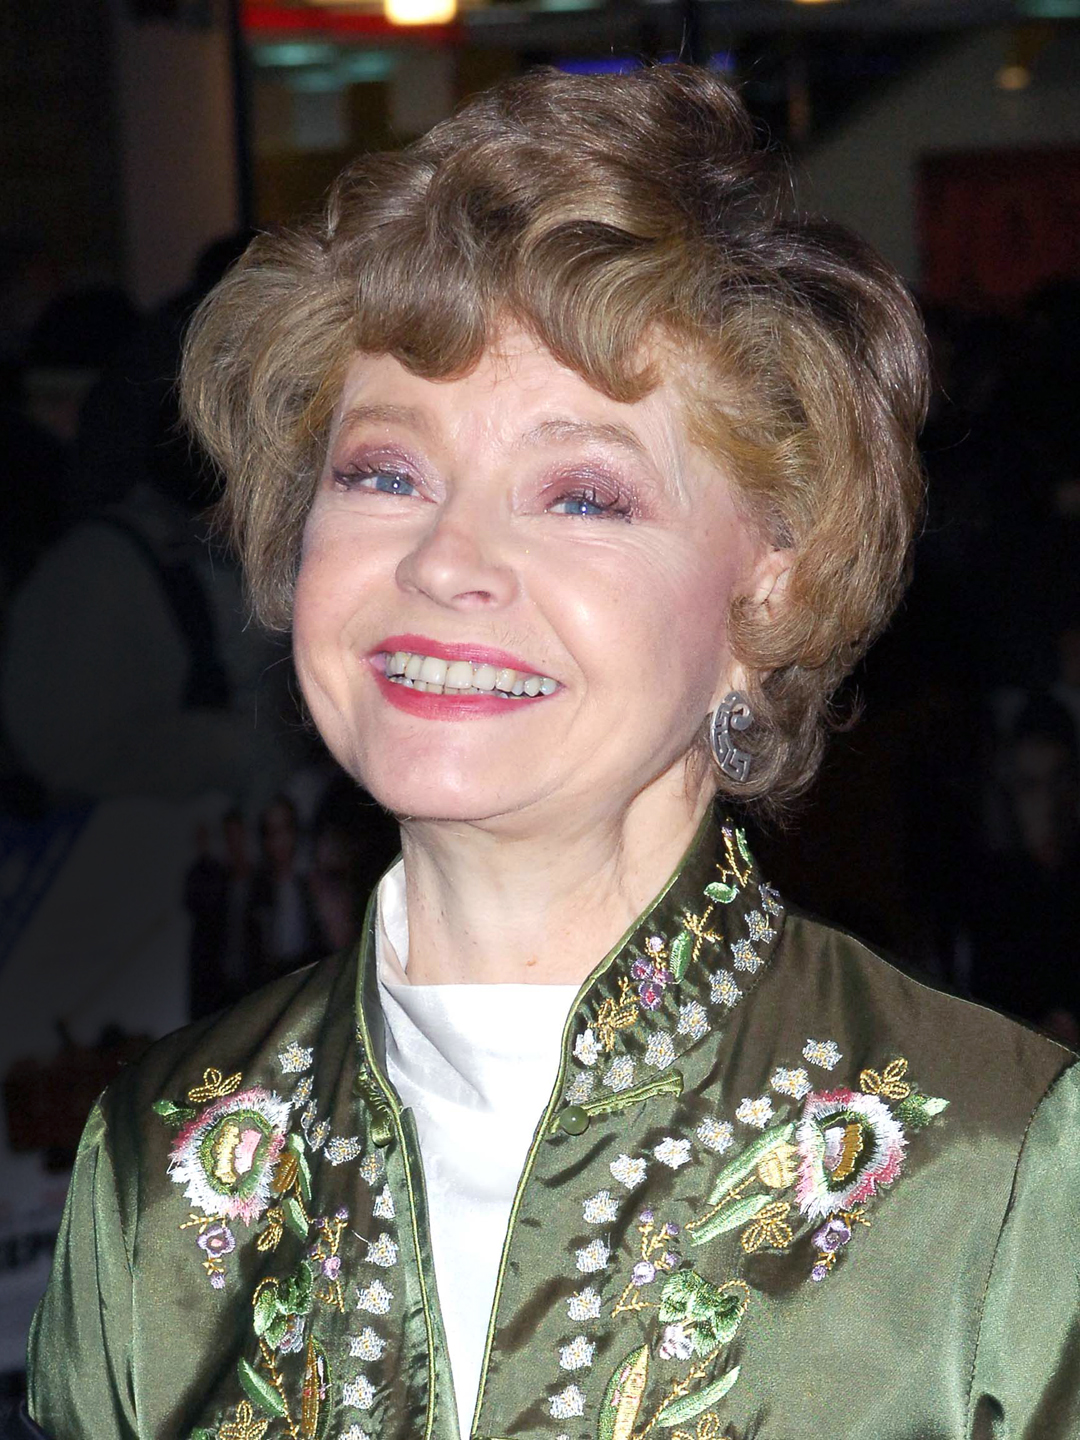 How tall is Prunella Scales?